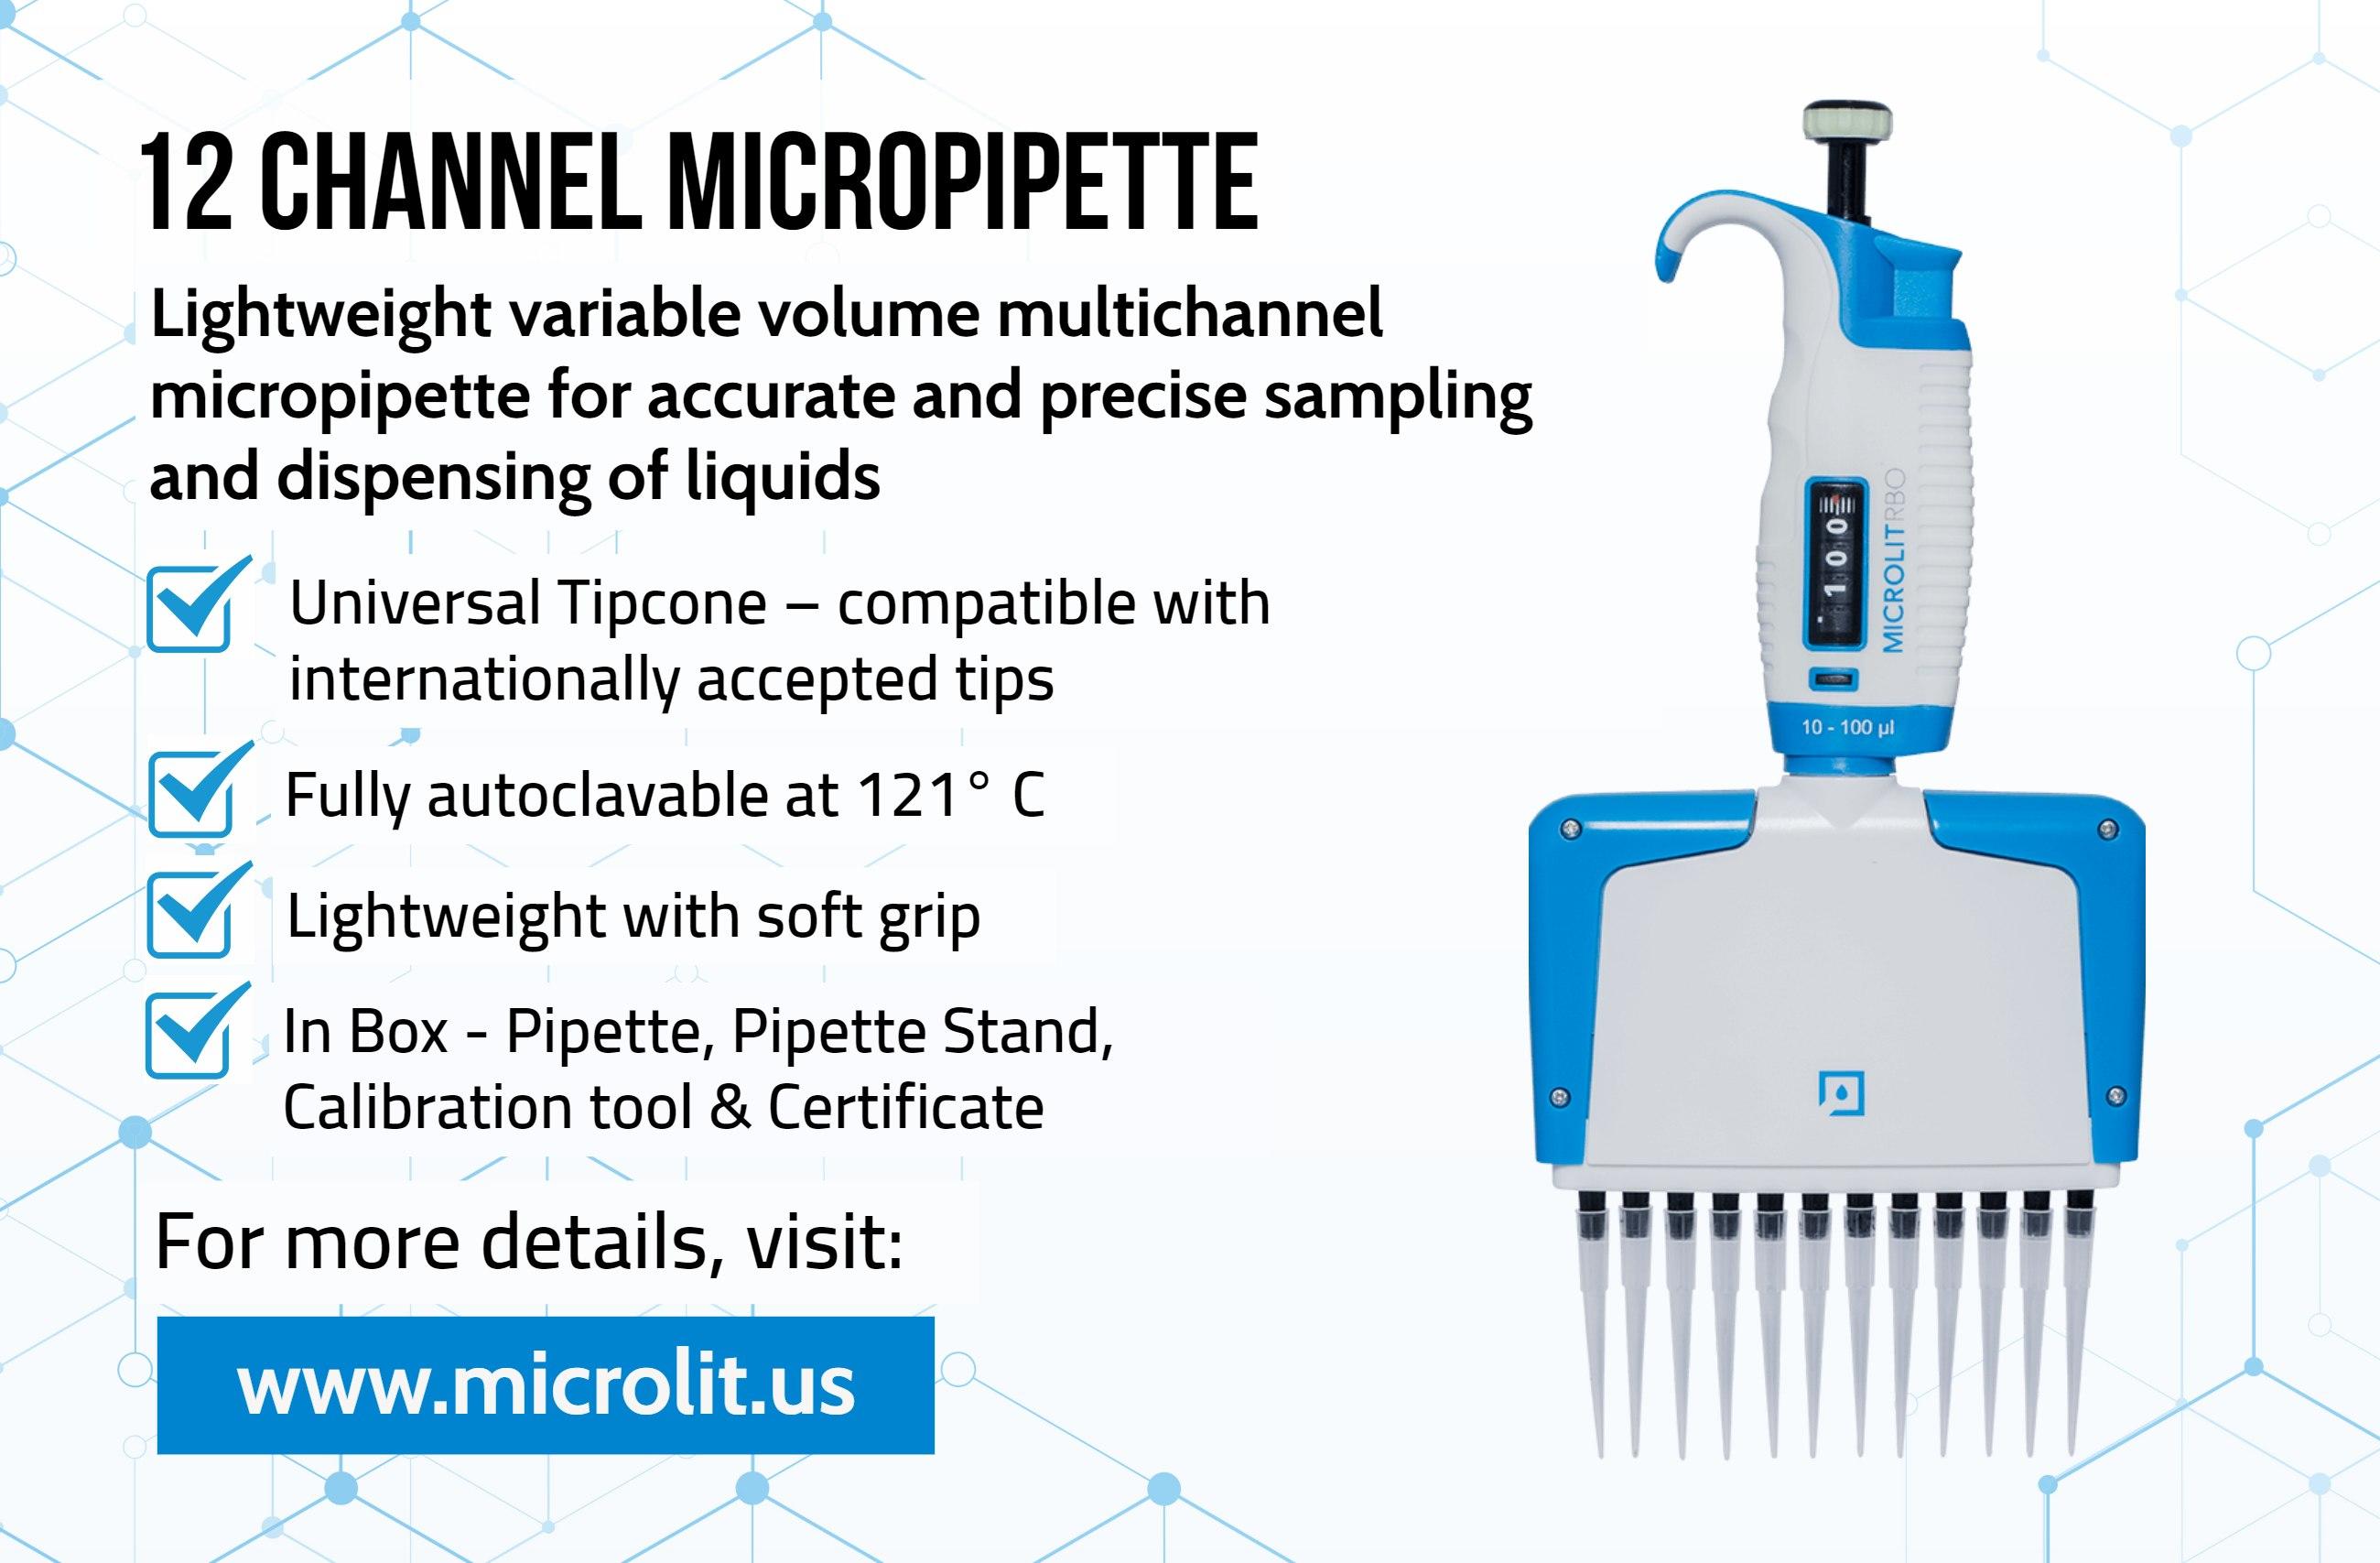 Image - Microlit offers the lightweight variable volume #MultichannelMicropipette for accurate and precise sampling a...